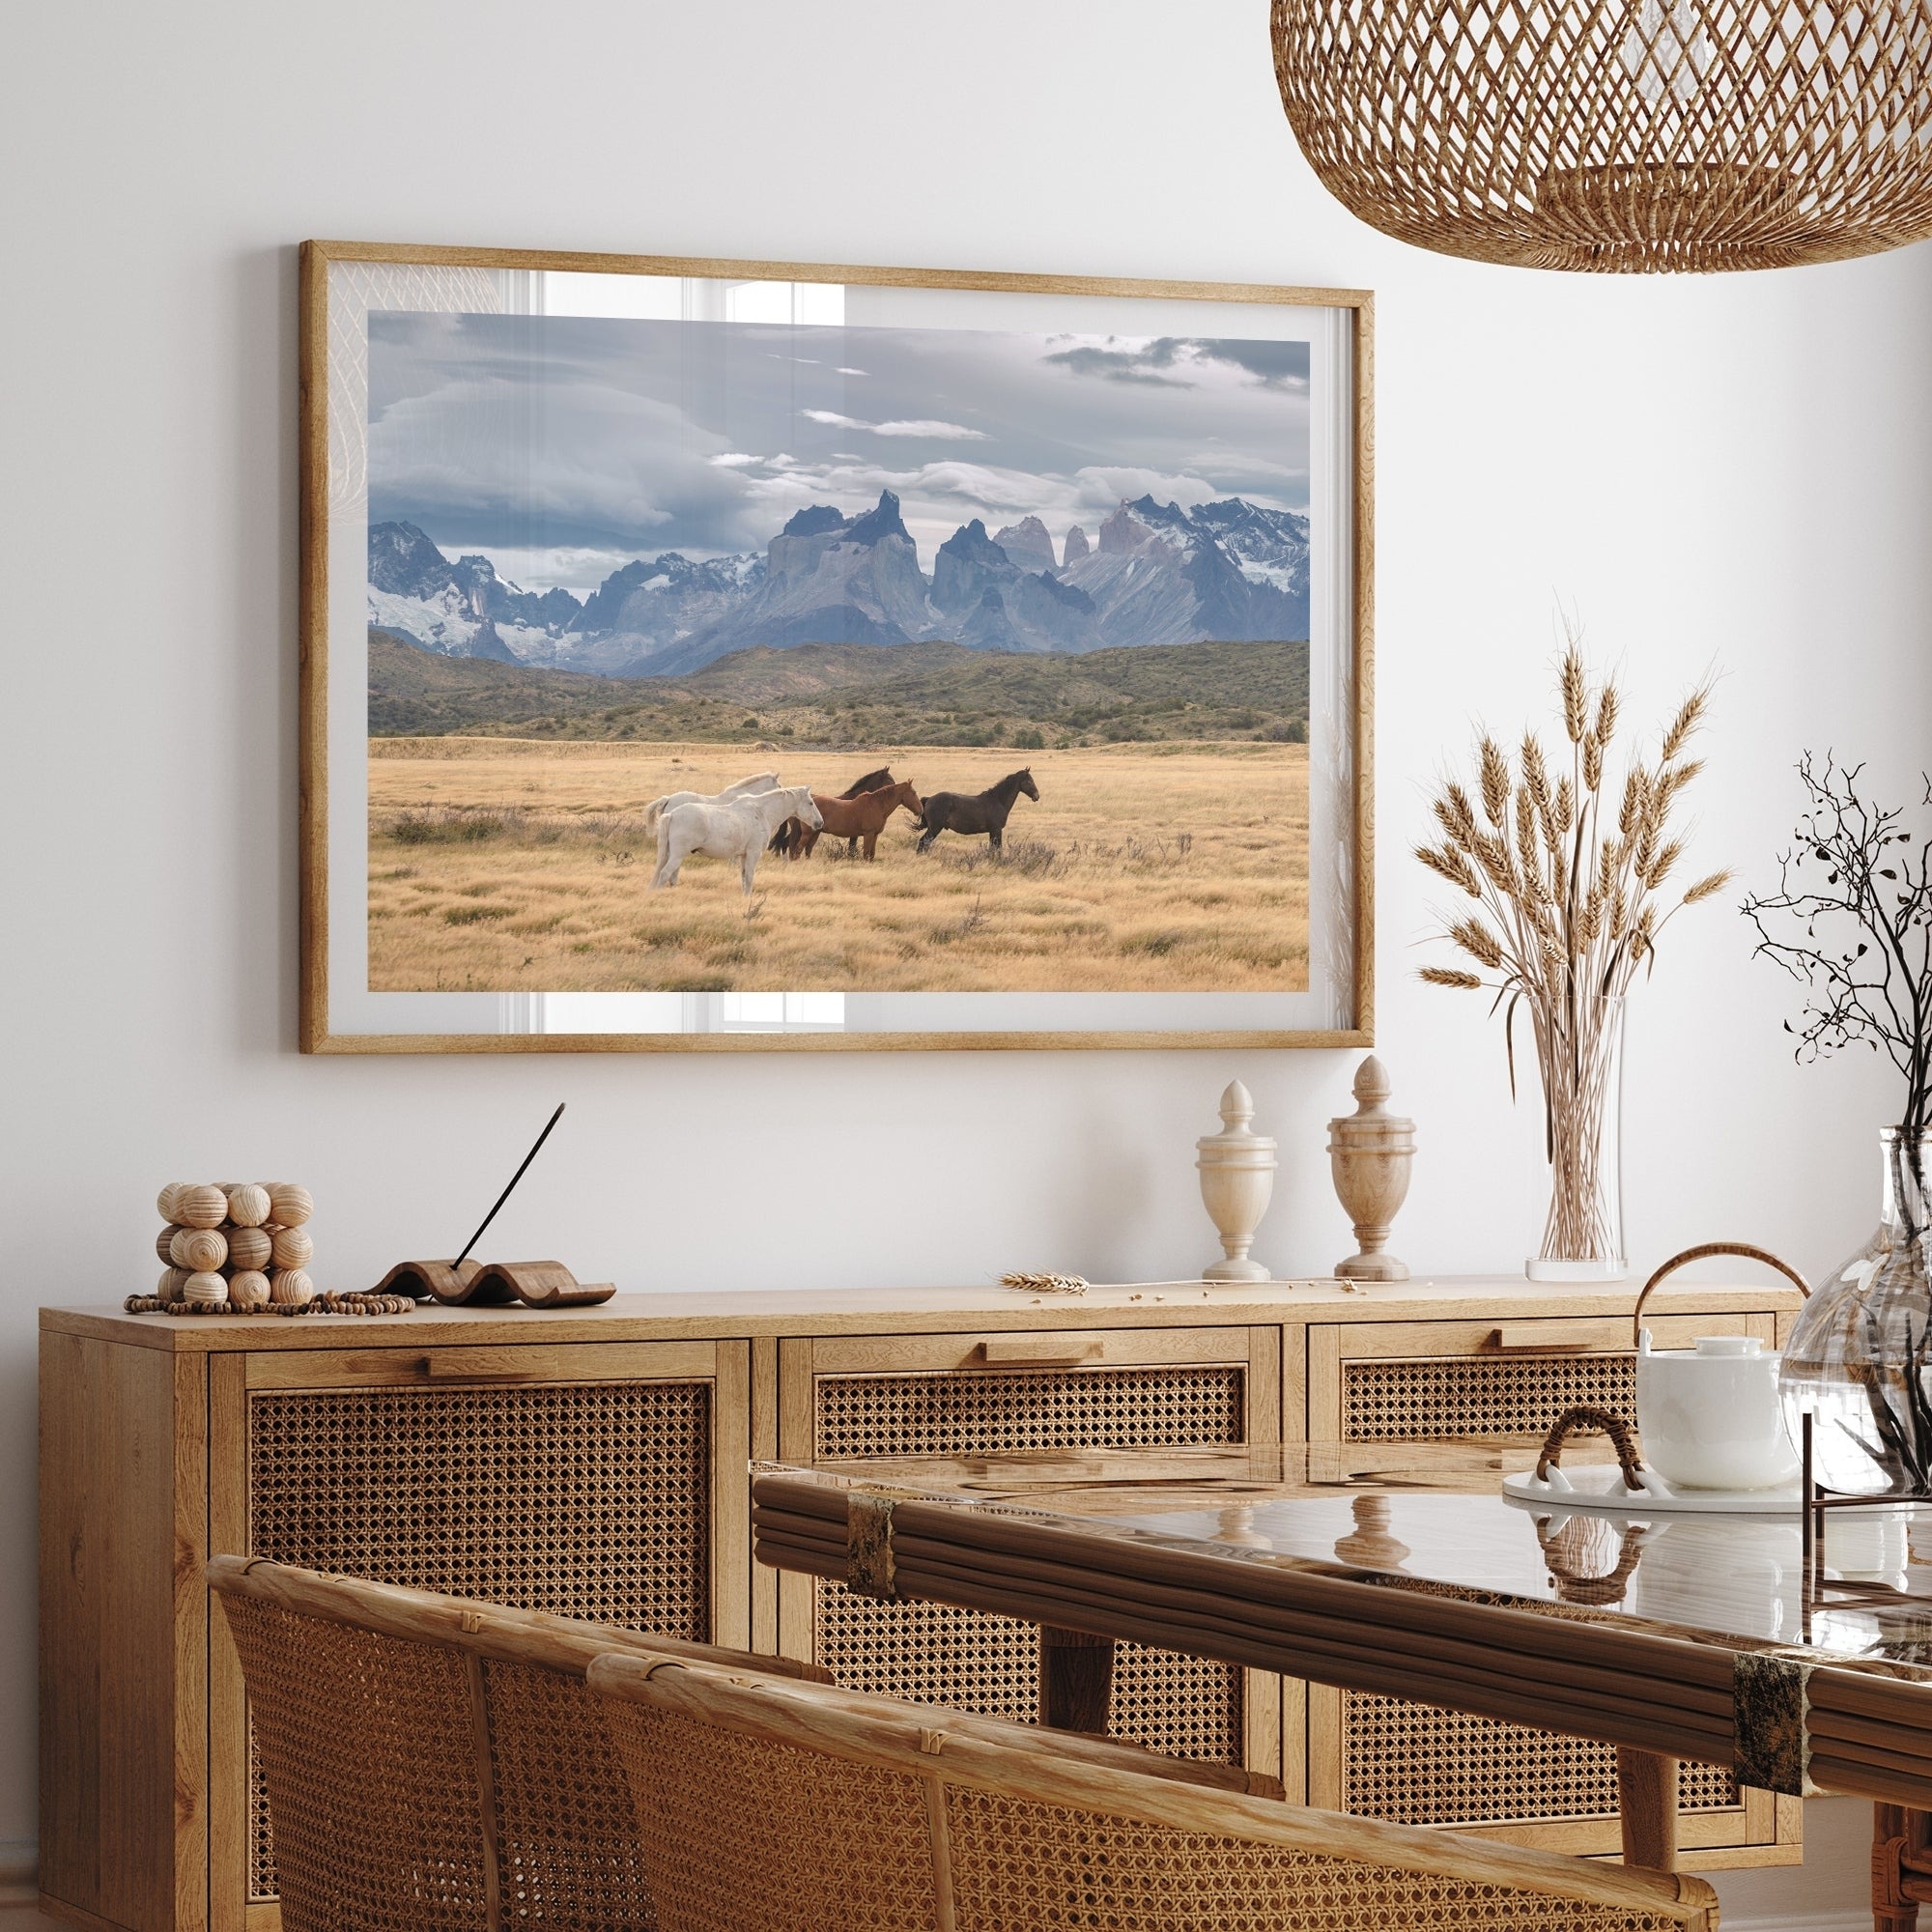 A framed picture of horses in a field hangs on a dining room wall, complementing the modern rustic decor